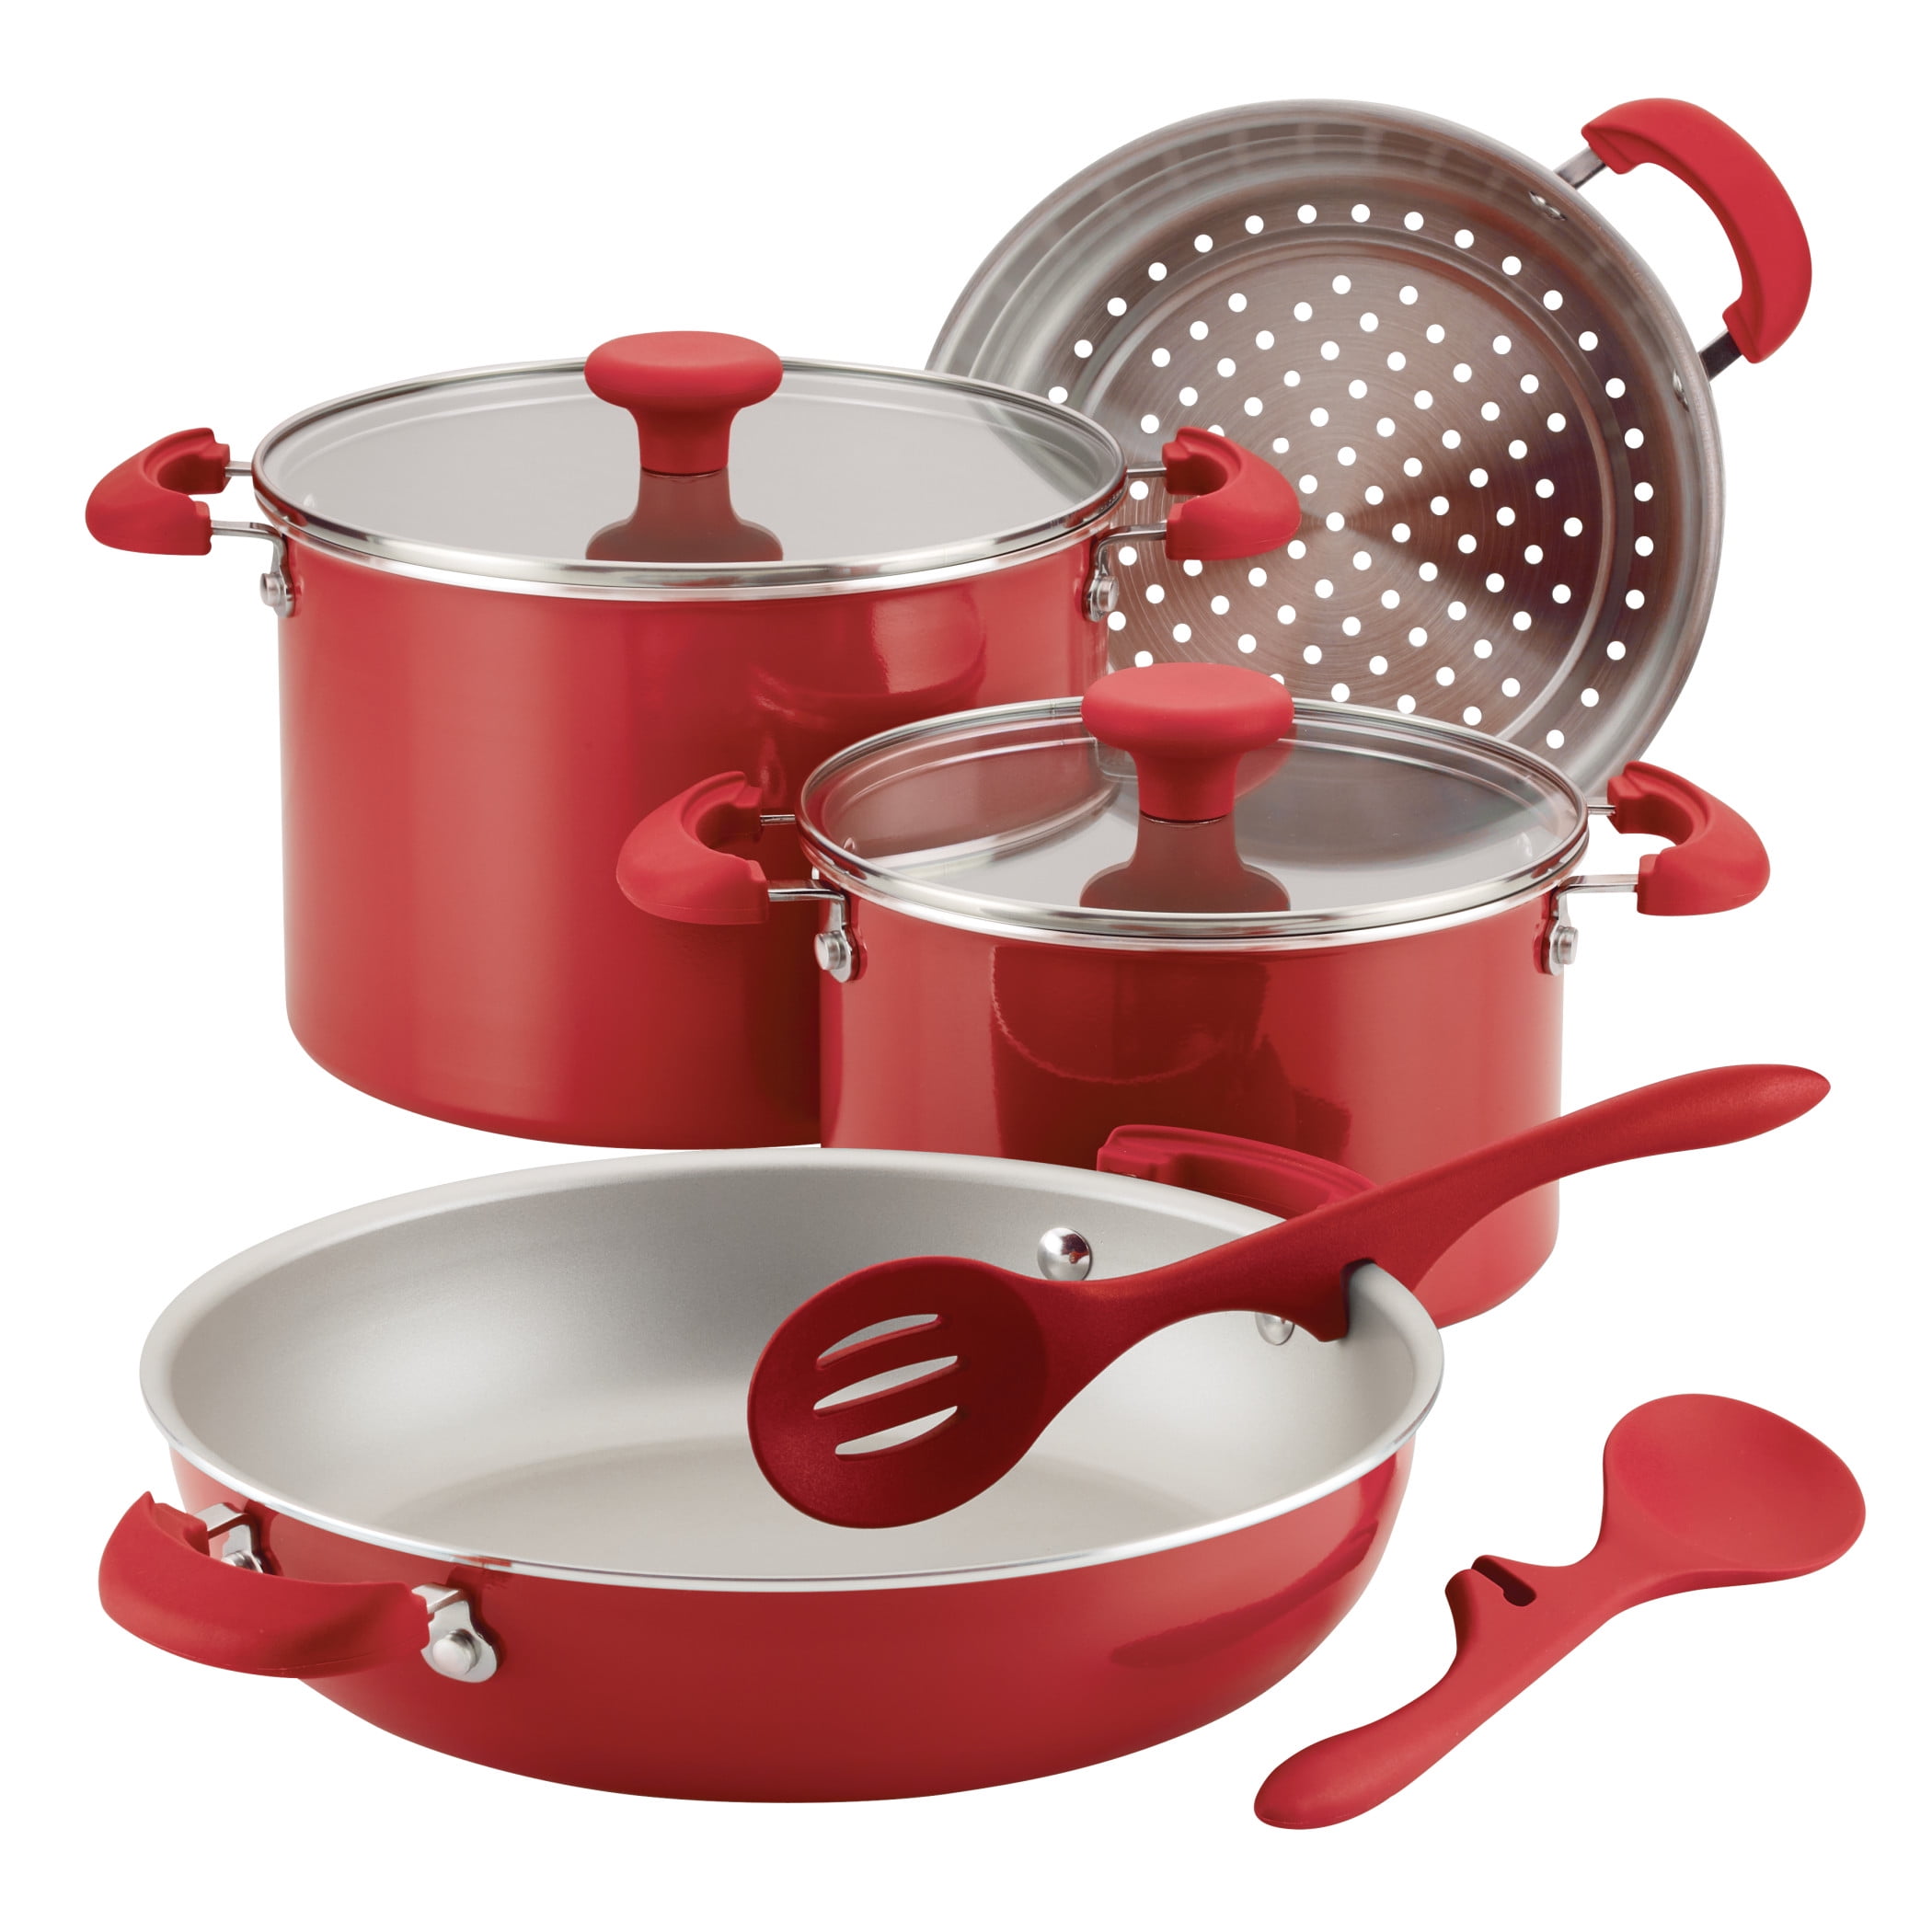 Rachael Ray 8-Piece Get Cooking! Stackable Nonstick Cookware Set, Red